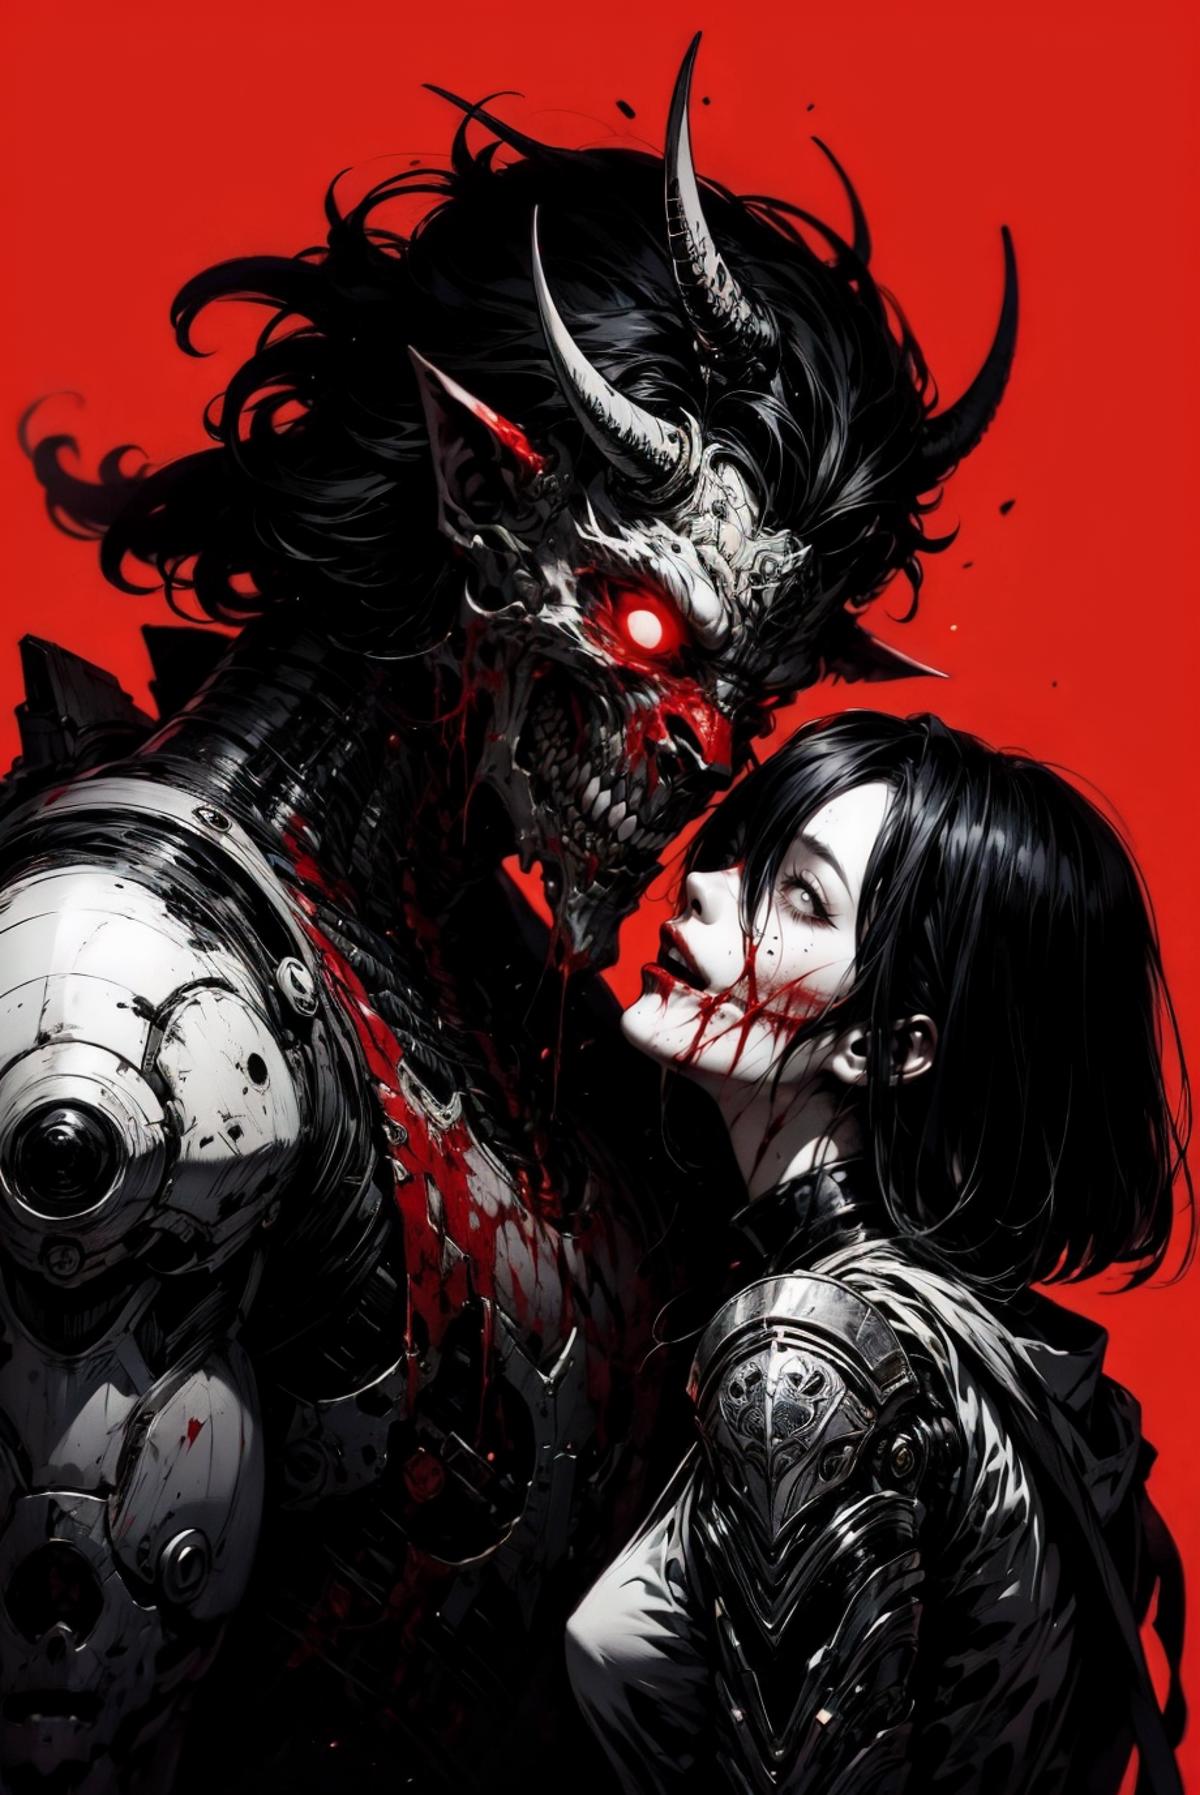 A demonic creature with red eyes and horns is seen with a woman who has blood coming from her mouth, both of them appearing to be in a romantic embrace.